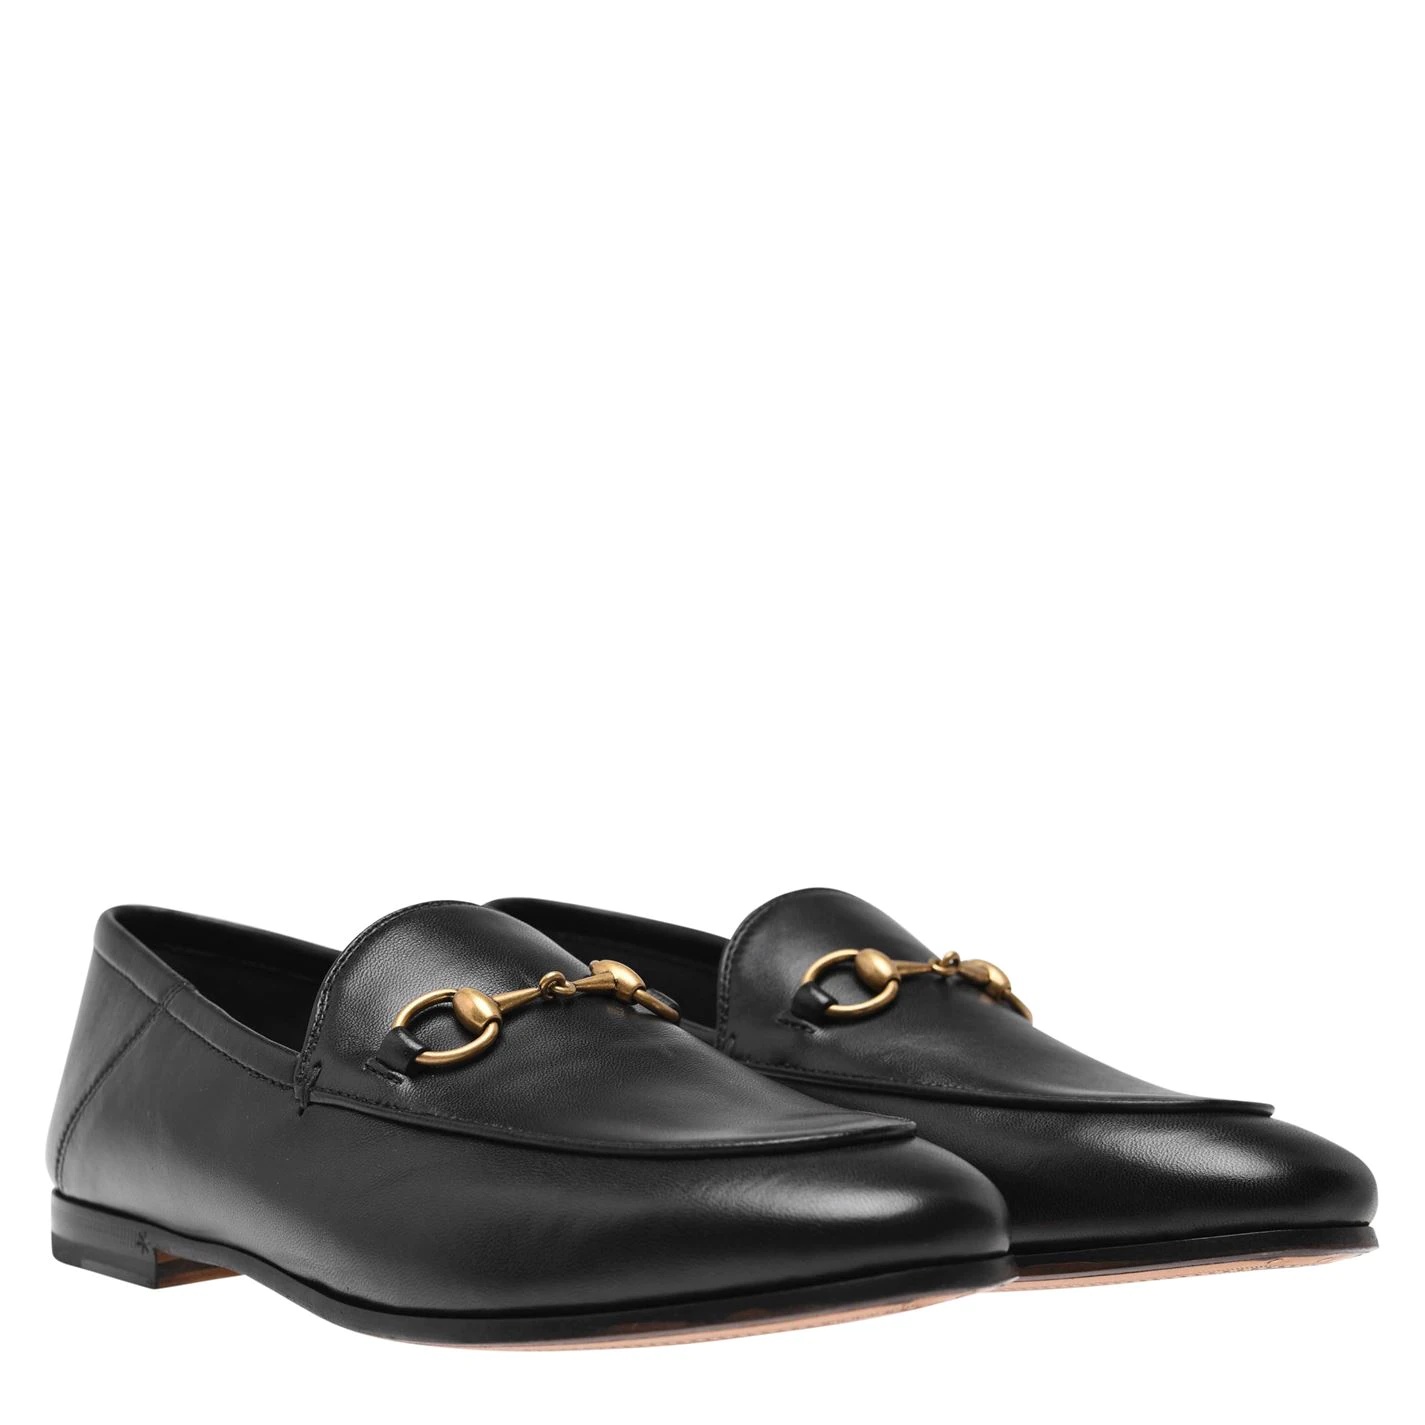 BRIXTON LOAFERS - 3